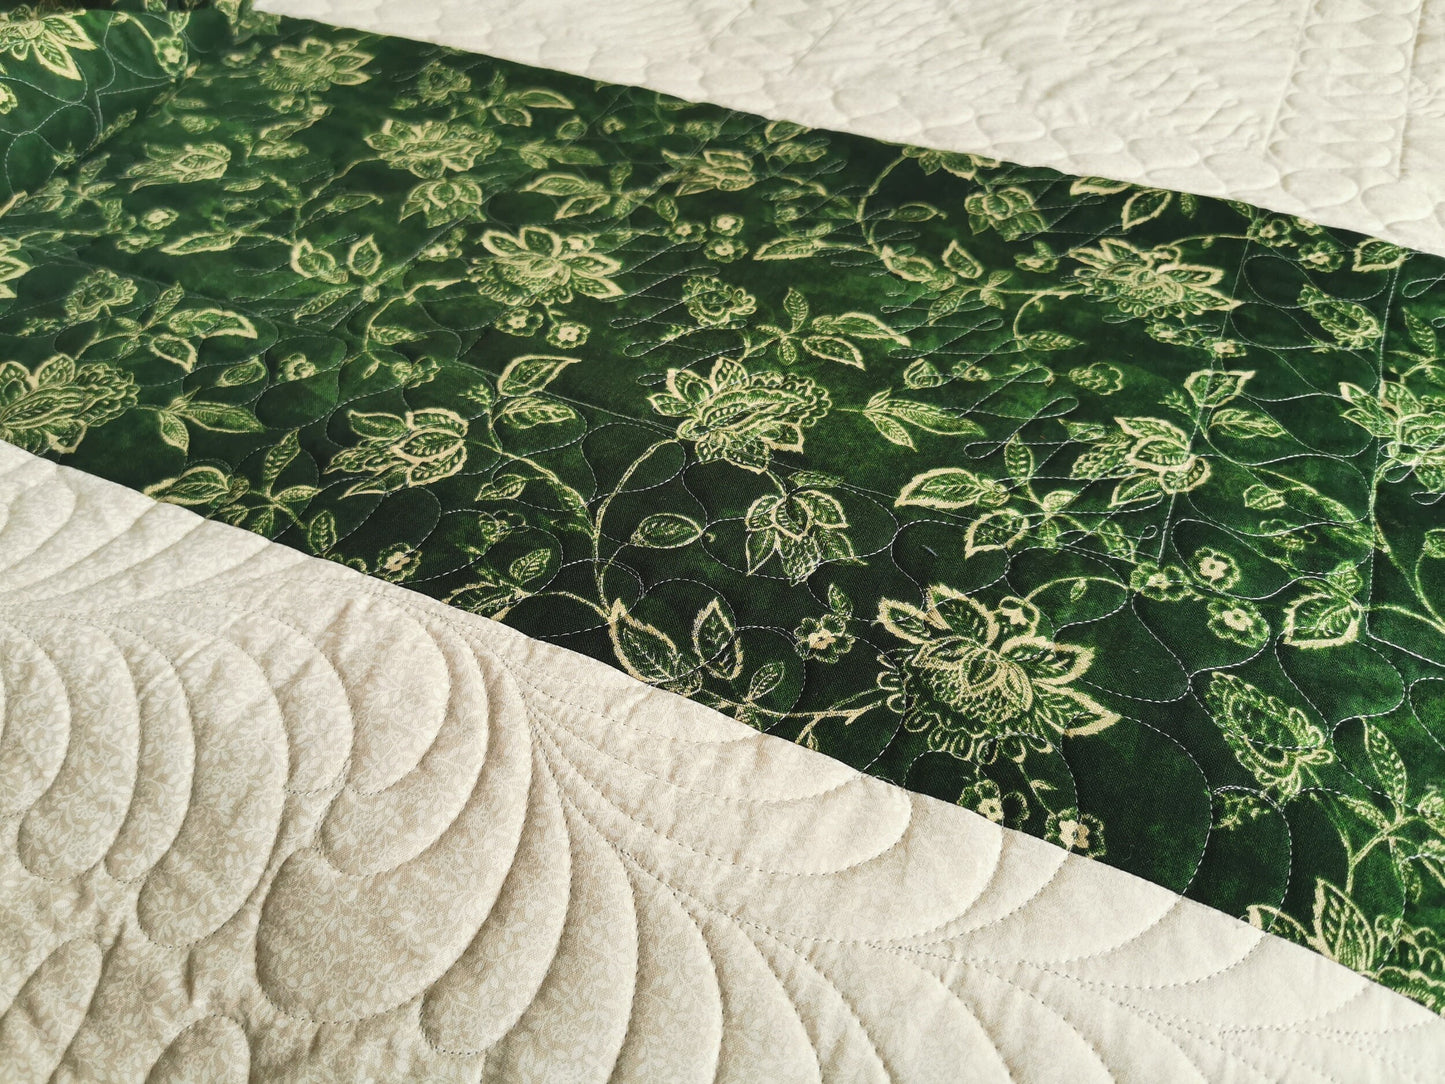 Showing the custom feather quilting and the dark green stripe on the back of the vintage queen quilt.